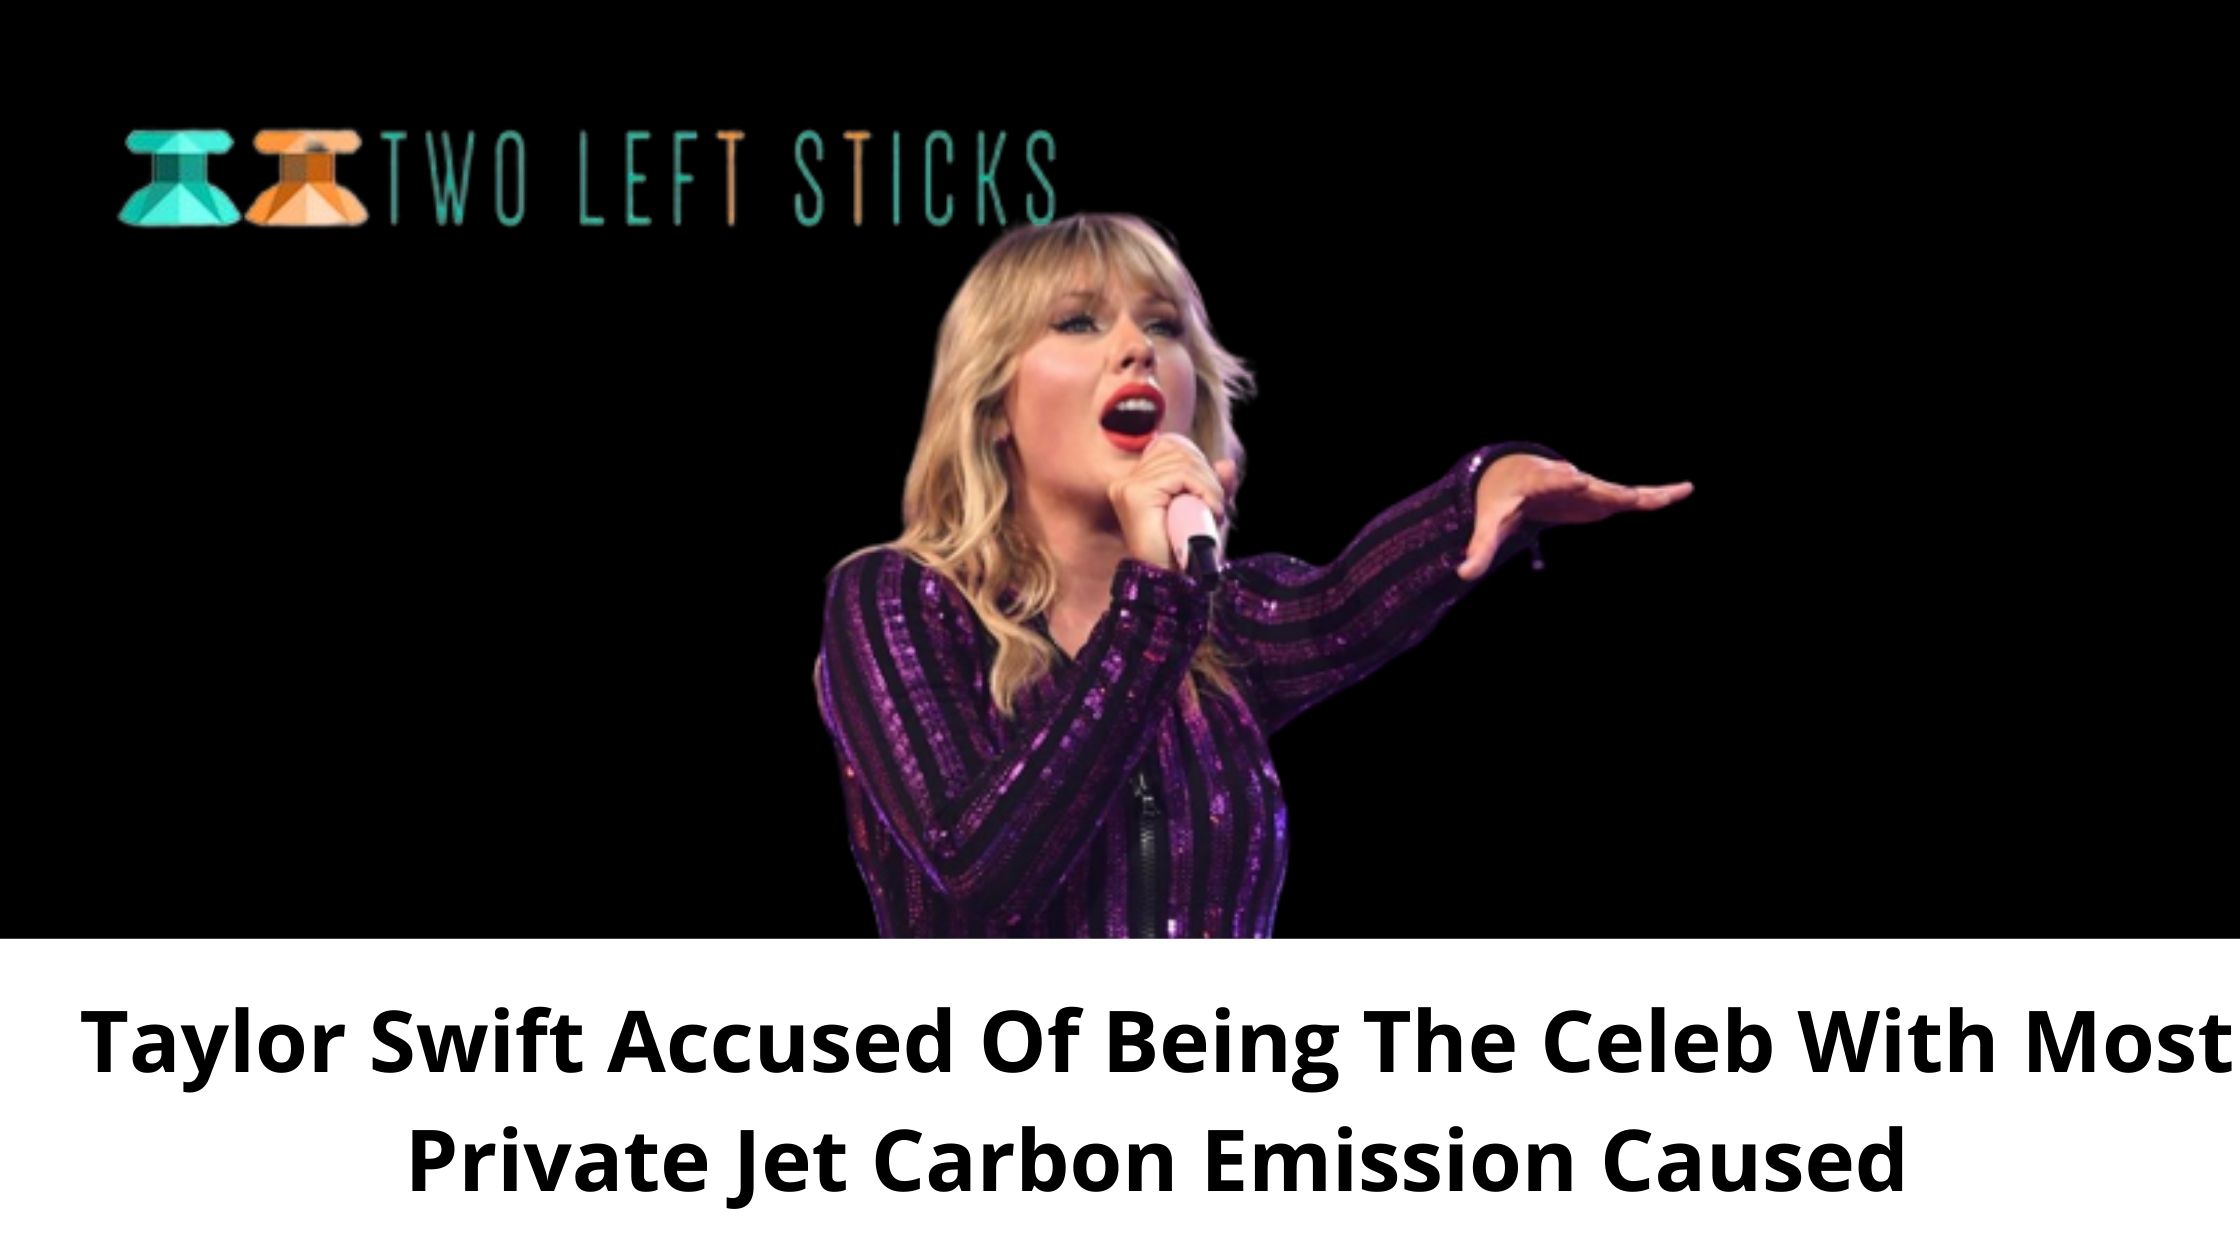 Taylor Swift Accused Of Being The Celeb With Most Private Jet Carbon Emission Caused-twoleftsticks(1)